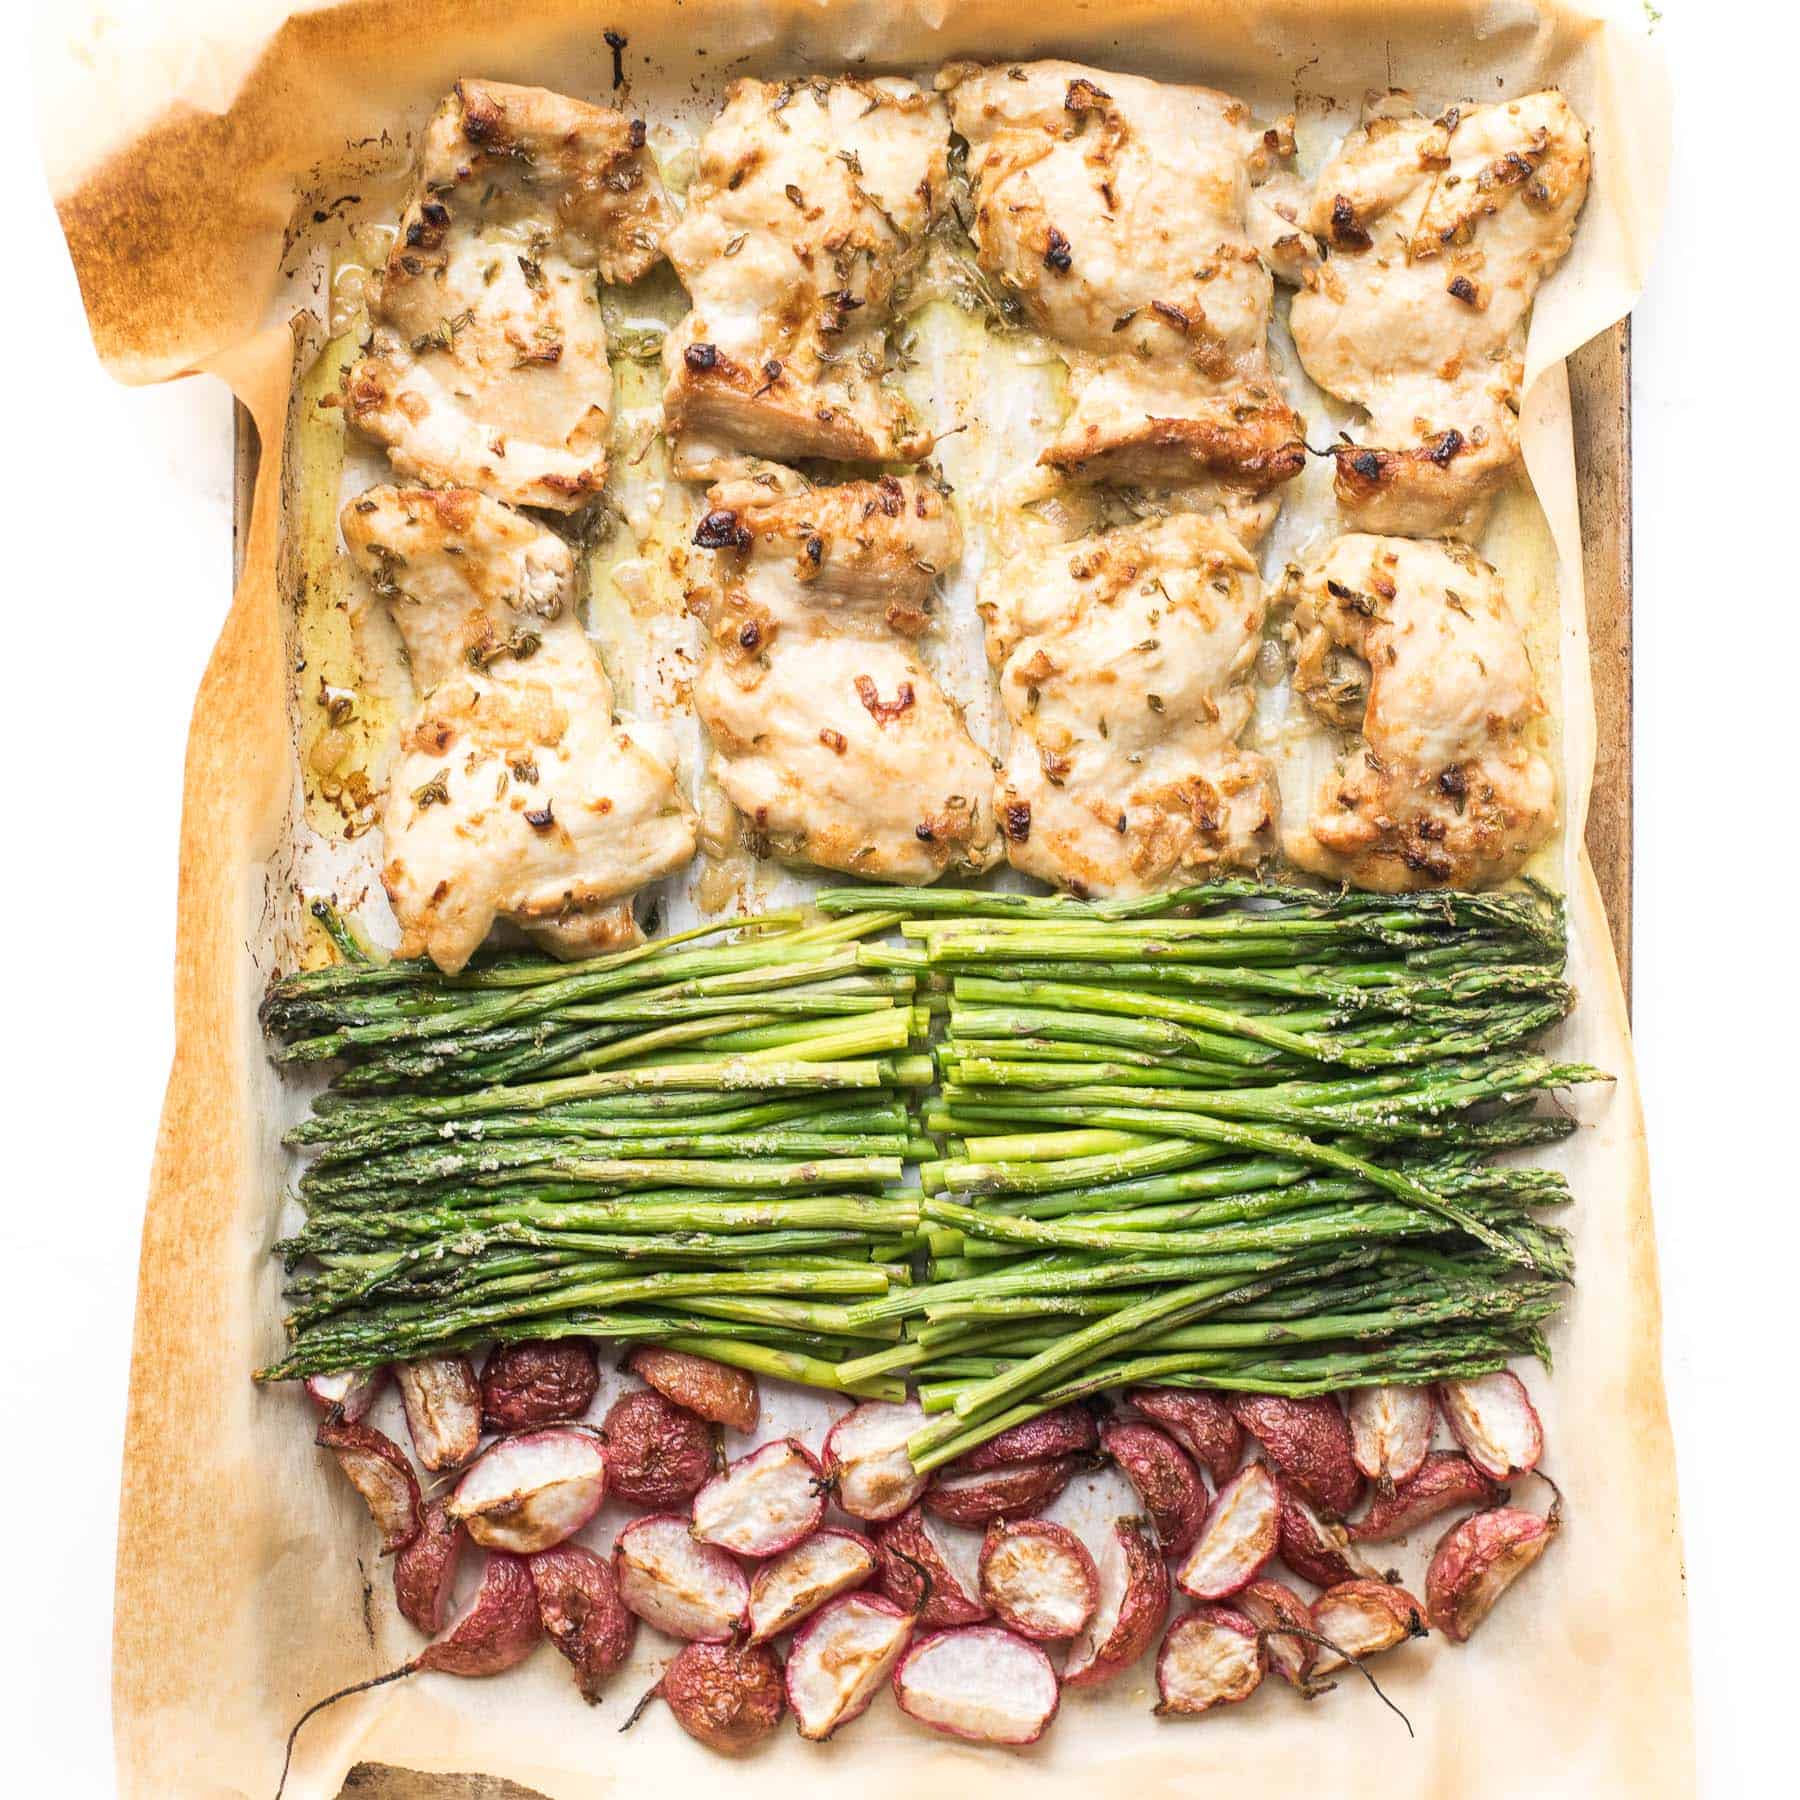 sheet pan dinner with dijon mustard chicken thighs, asparagus and radishes